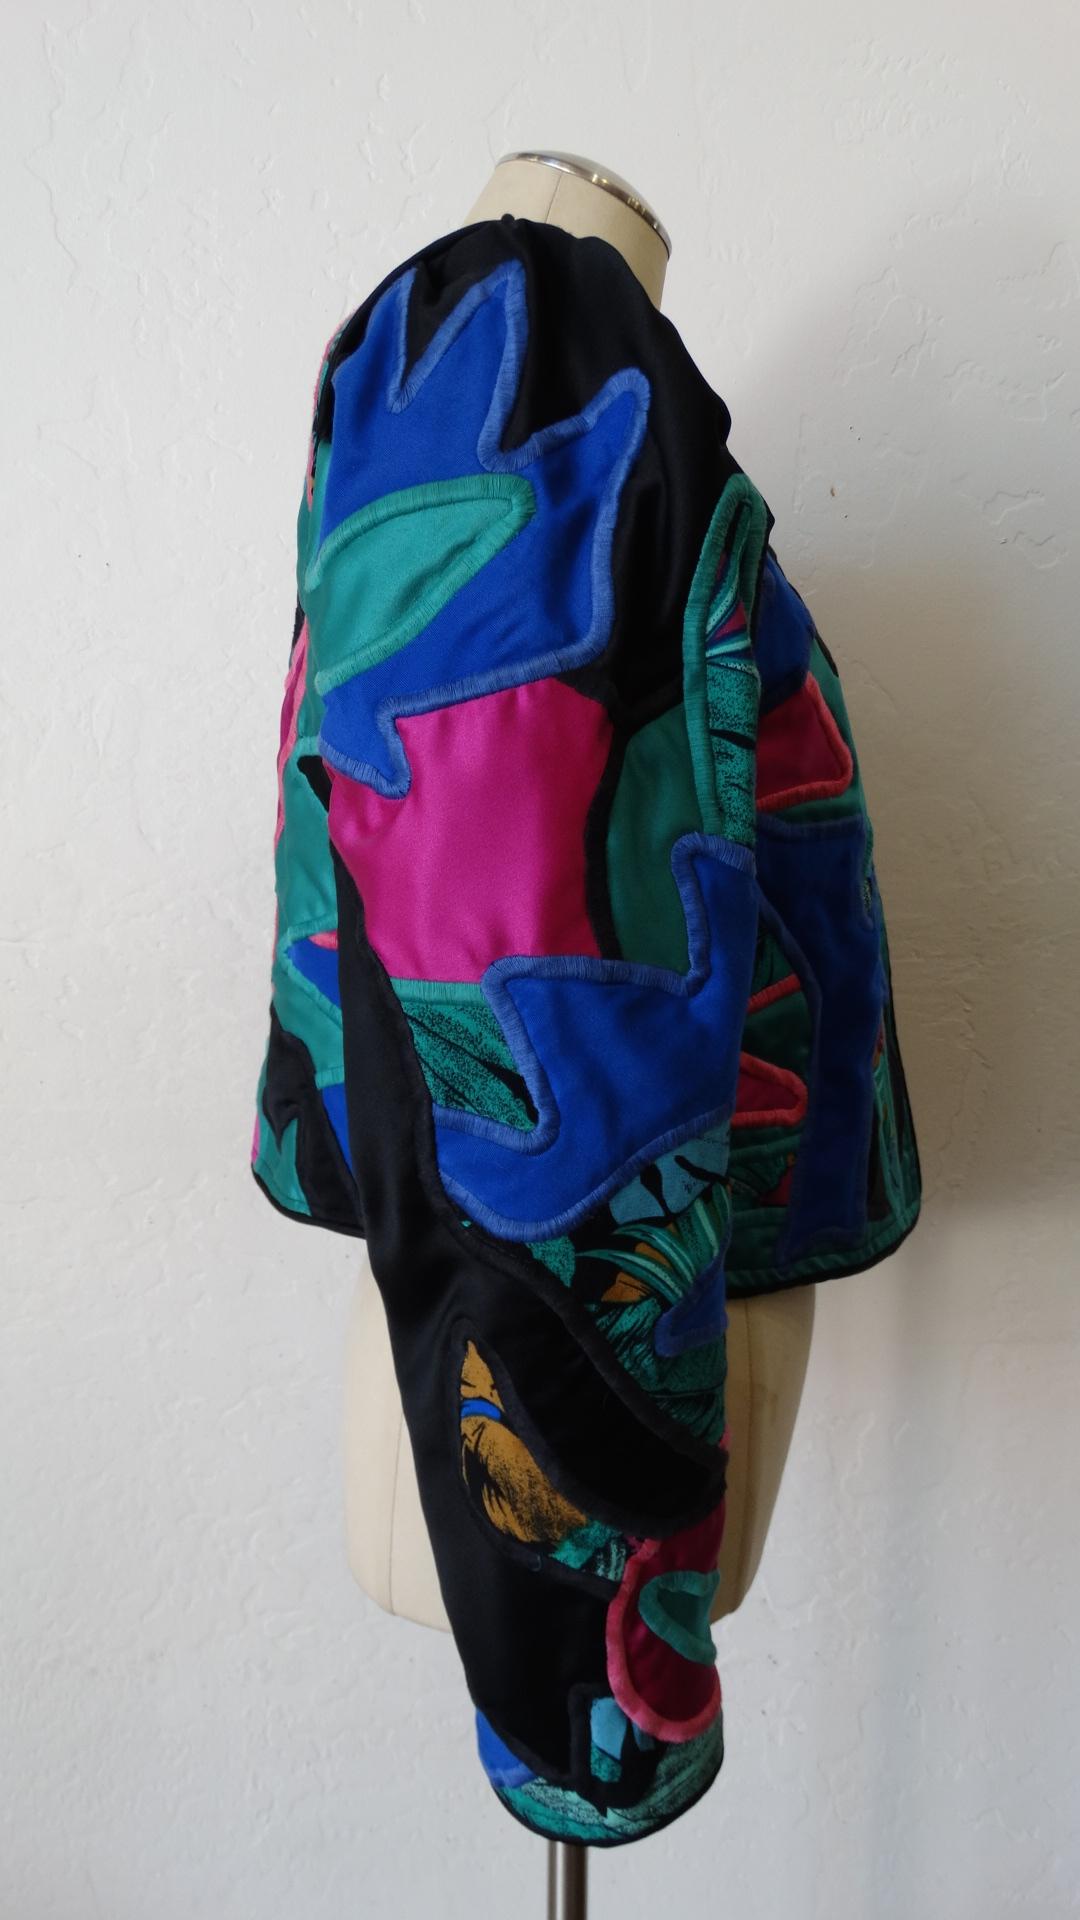 The Most Unique Jacket Is Here! Circa 1980s, this Judith Roberts jacket features amazing appliqué patchwork made up of abstract designs in bright colors and beautiful tropical greenery fabrics. Includes puffed long sleeves and great structure.